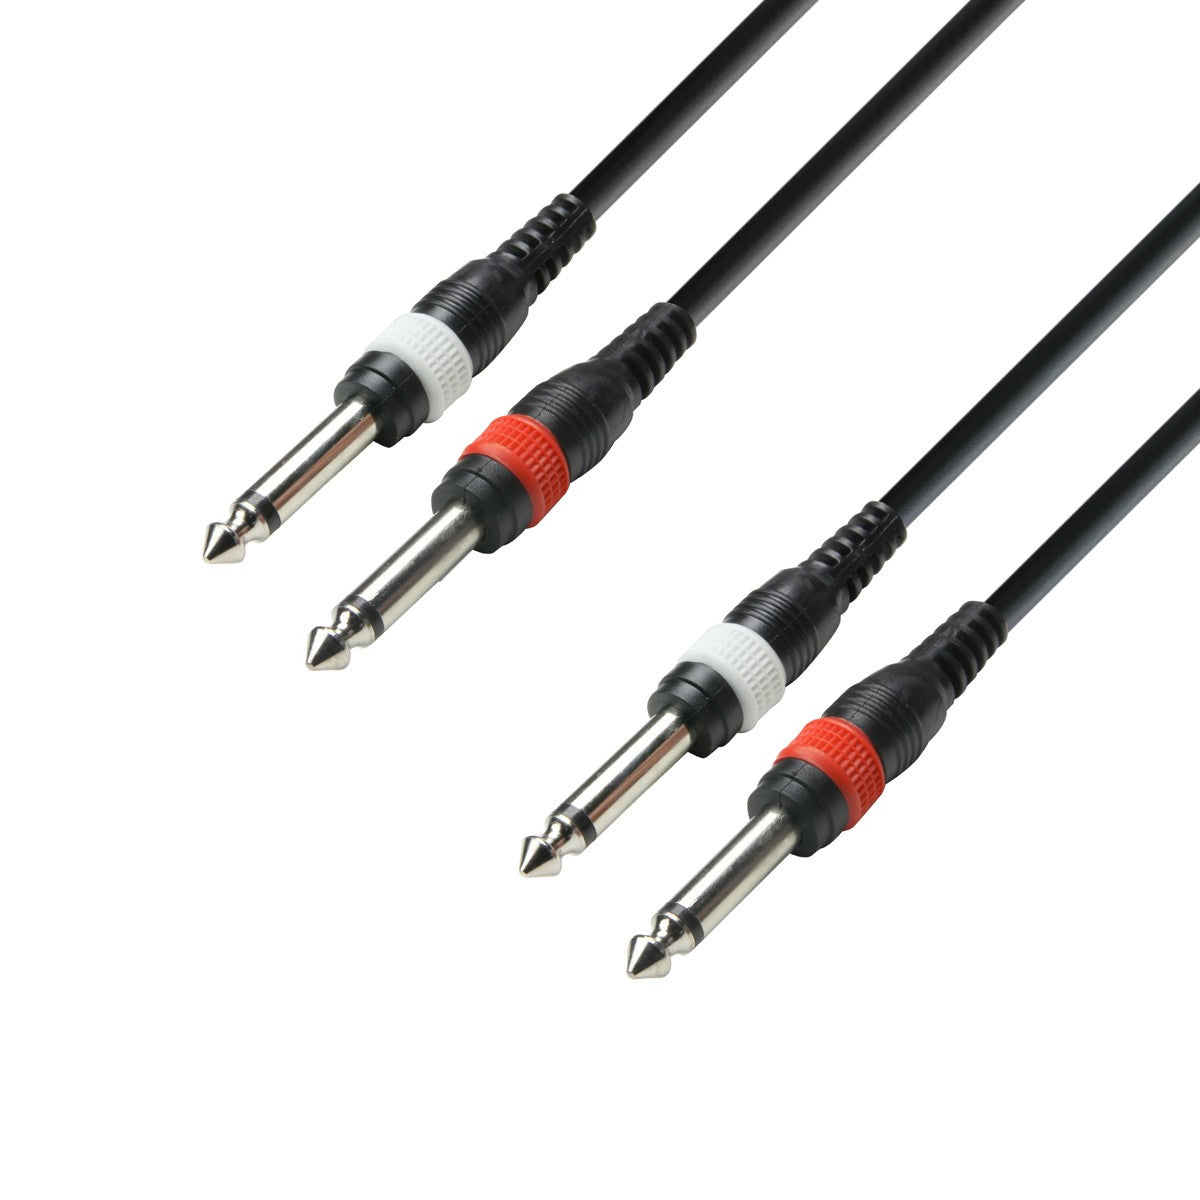 Adam Hall Cables K3 TPP 0600 - Audio Cable 2 x 6.3mm Jack mono to 2 x 6.3mm Jack mono 6m